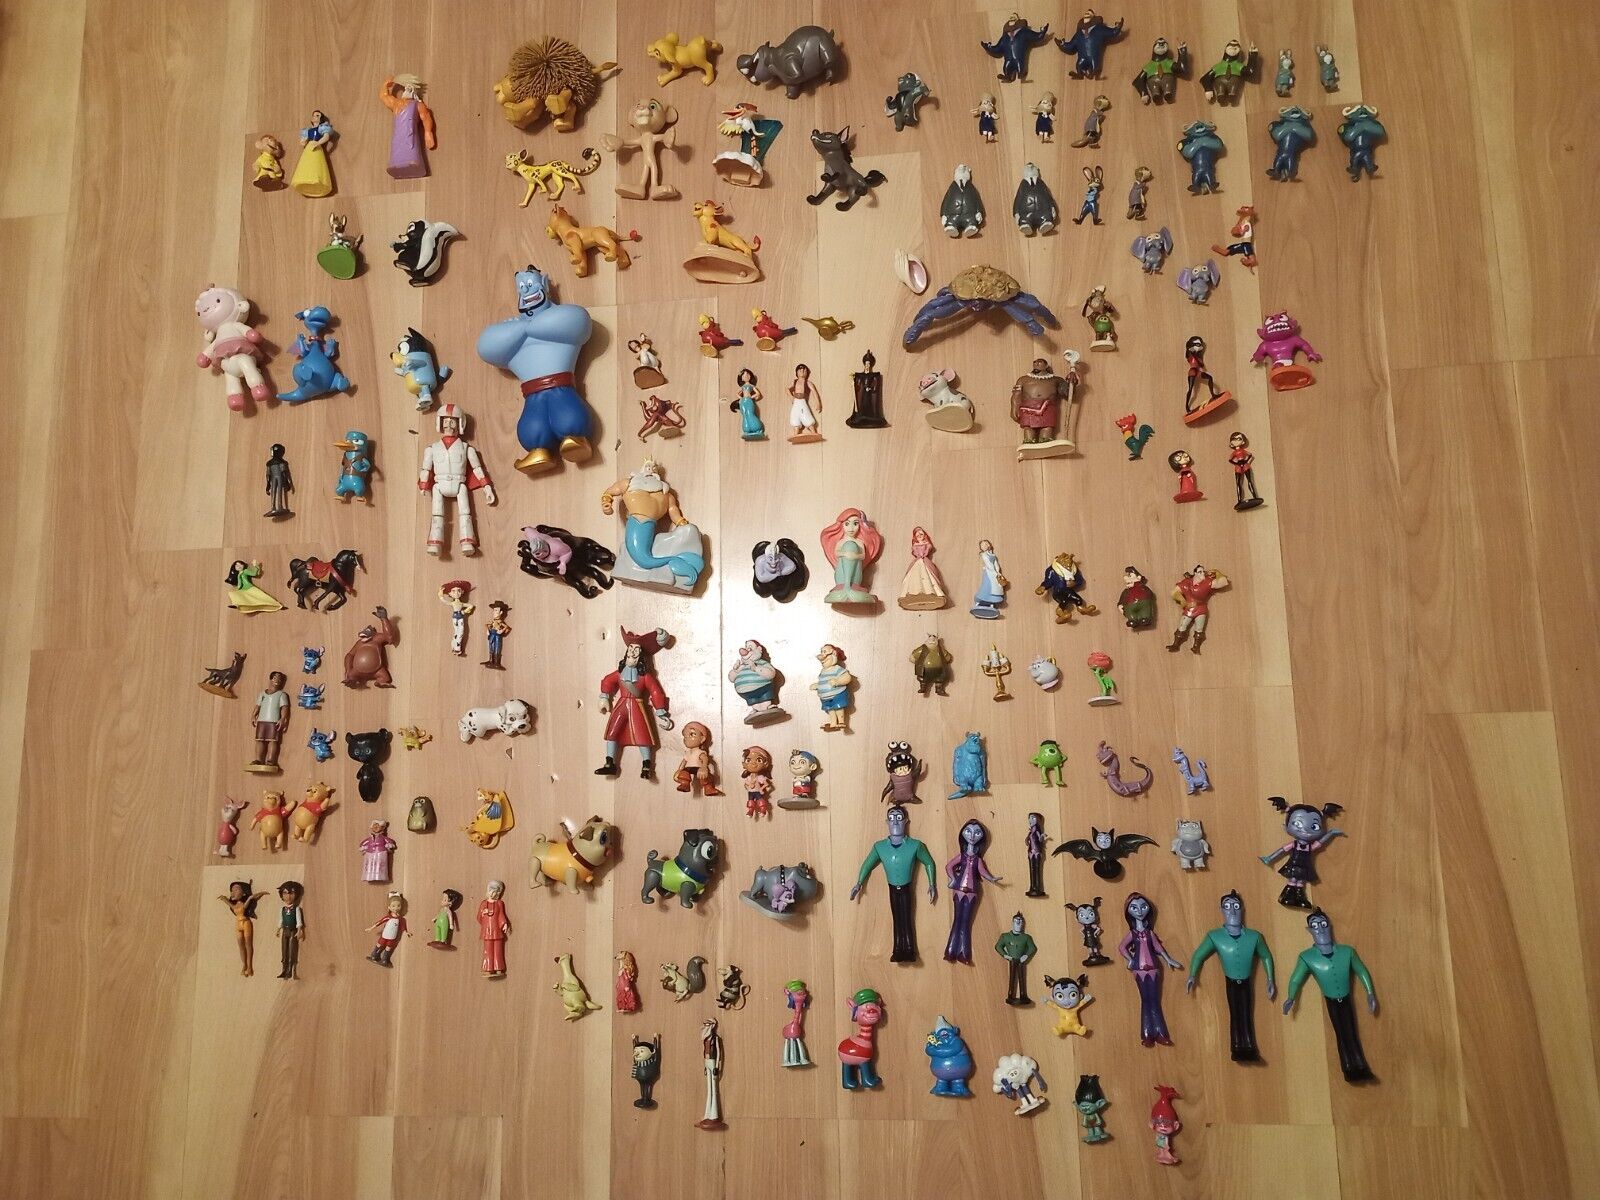 Disney 1980s 1990s 2000s PVC Cake Topper Figurines Mixed Toy Lot of 90+